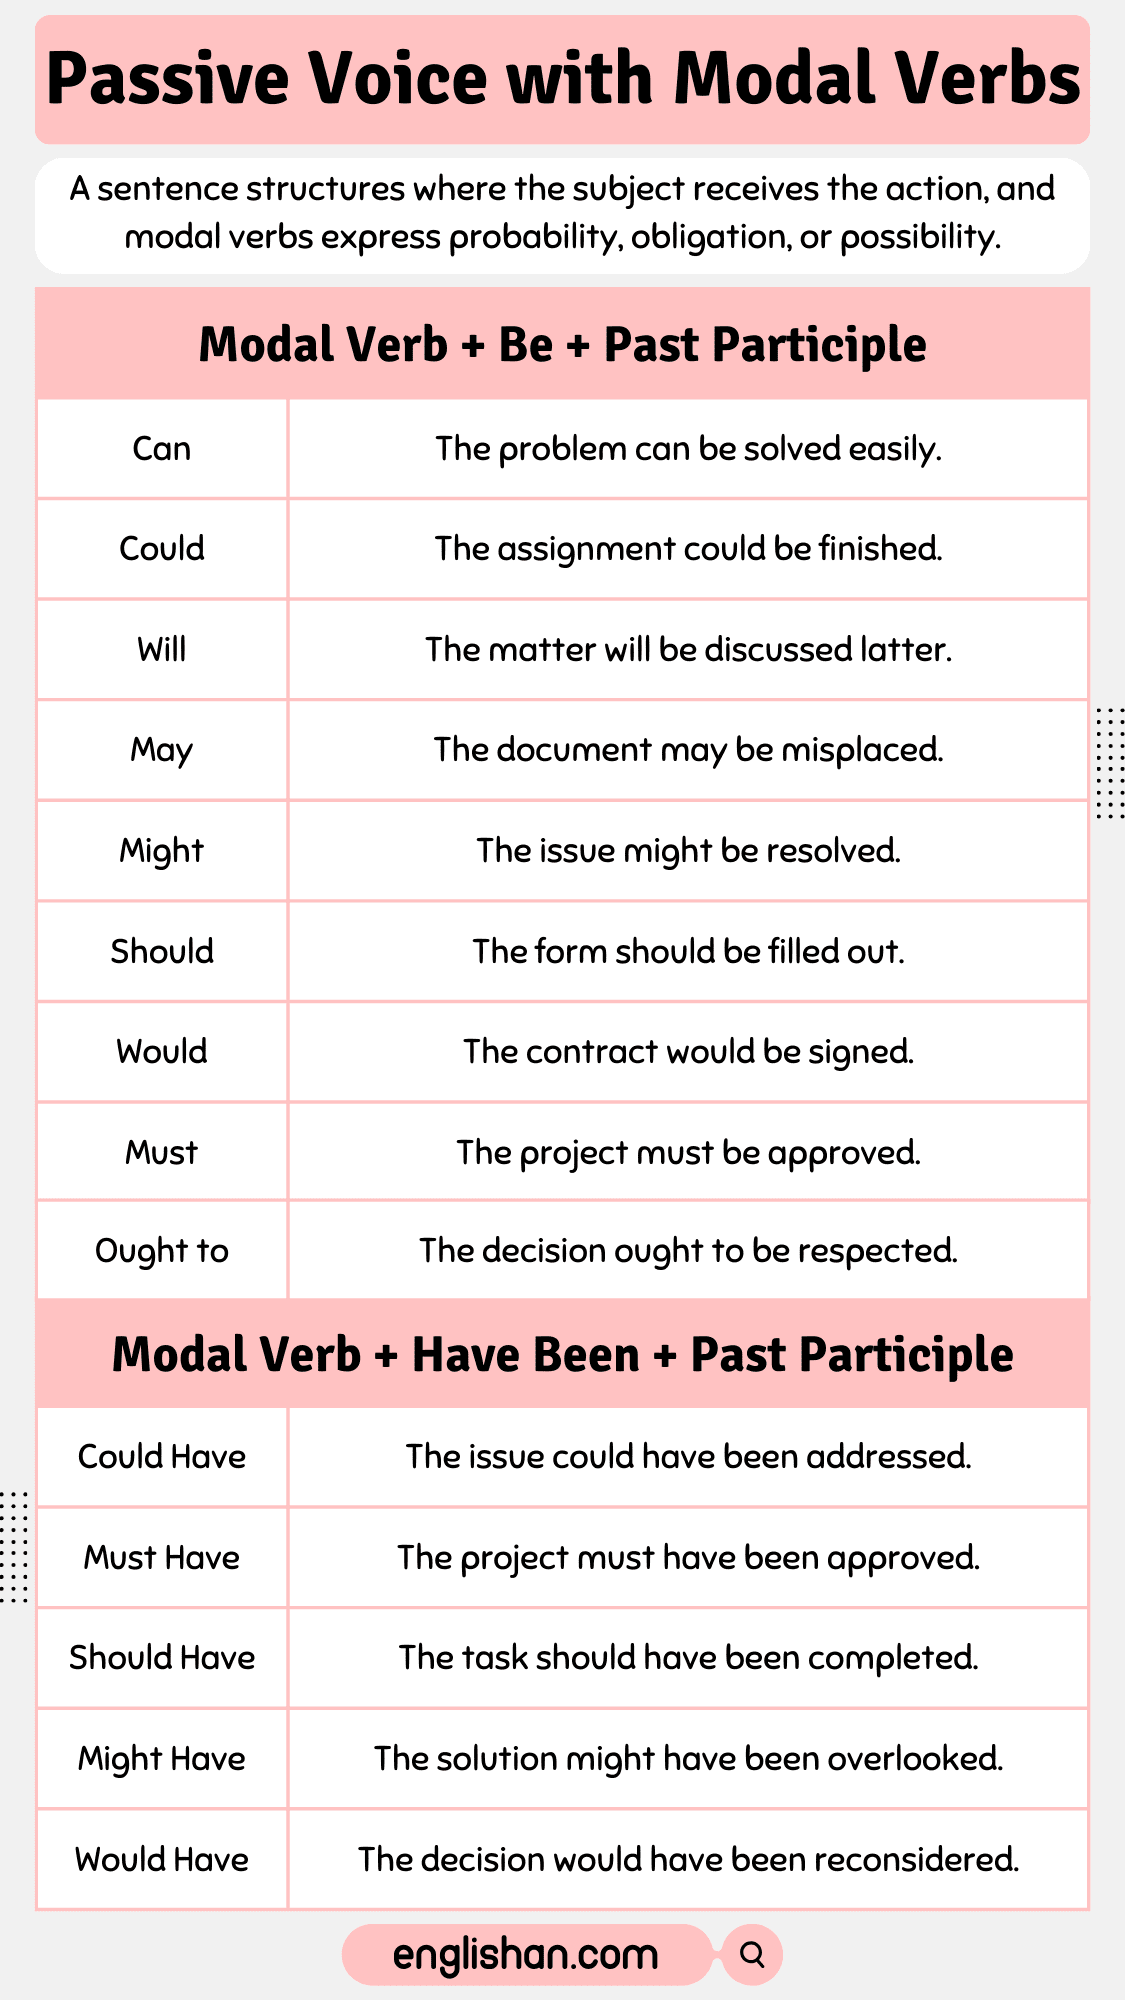 Passive Voice with Modal Verbs